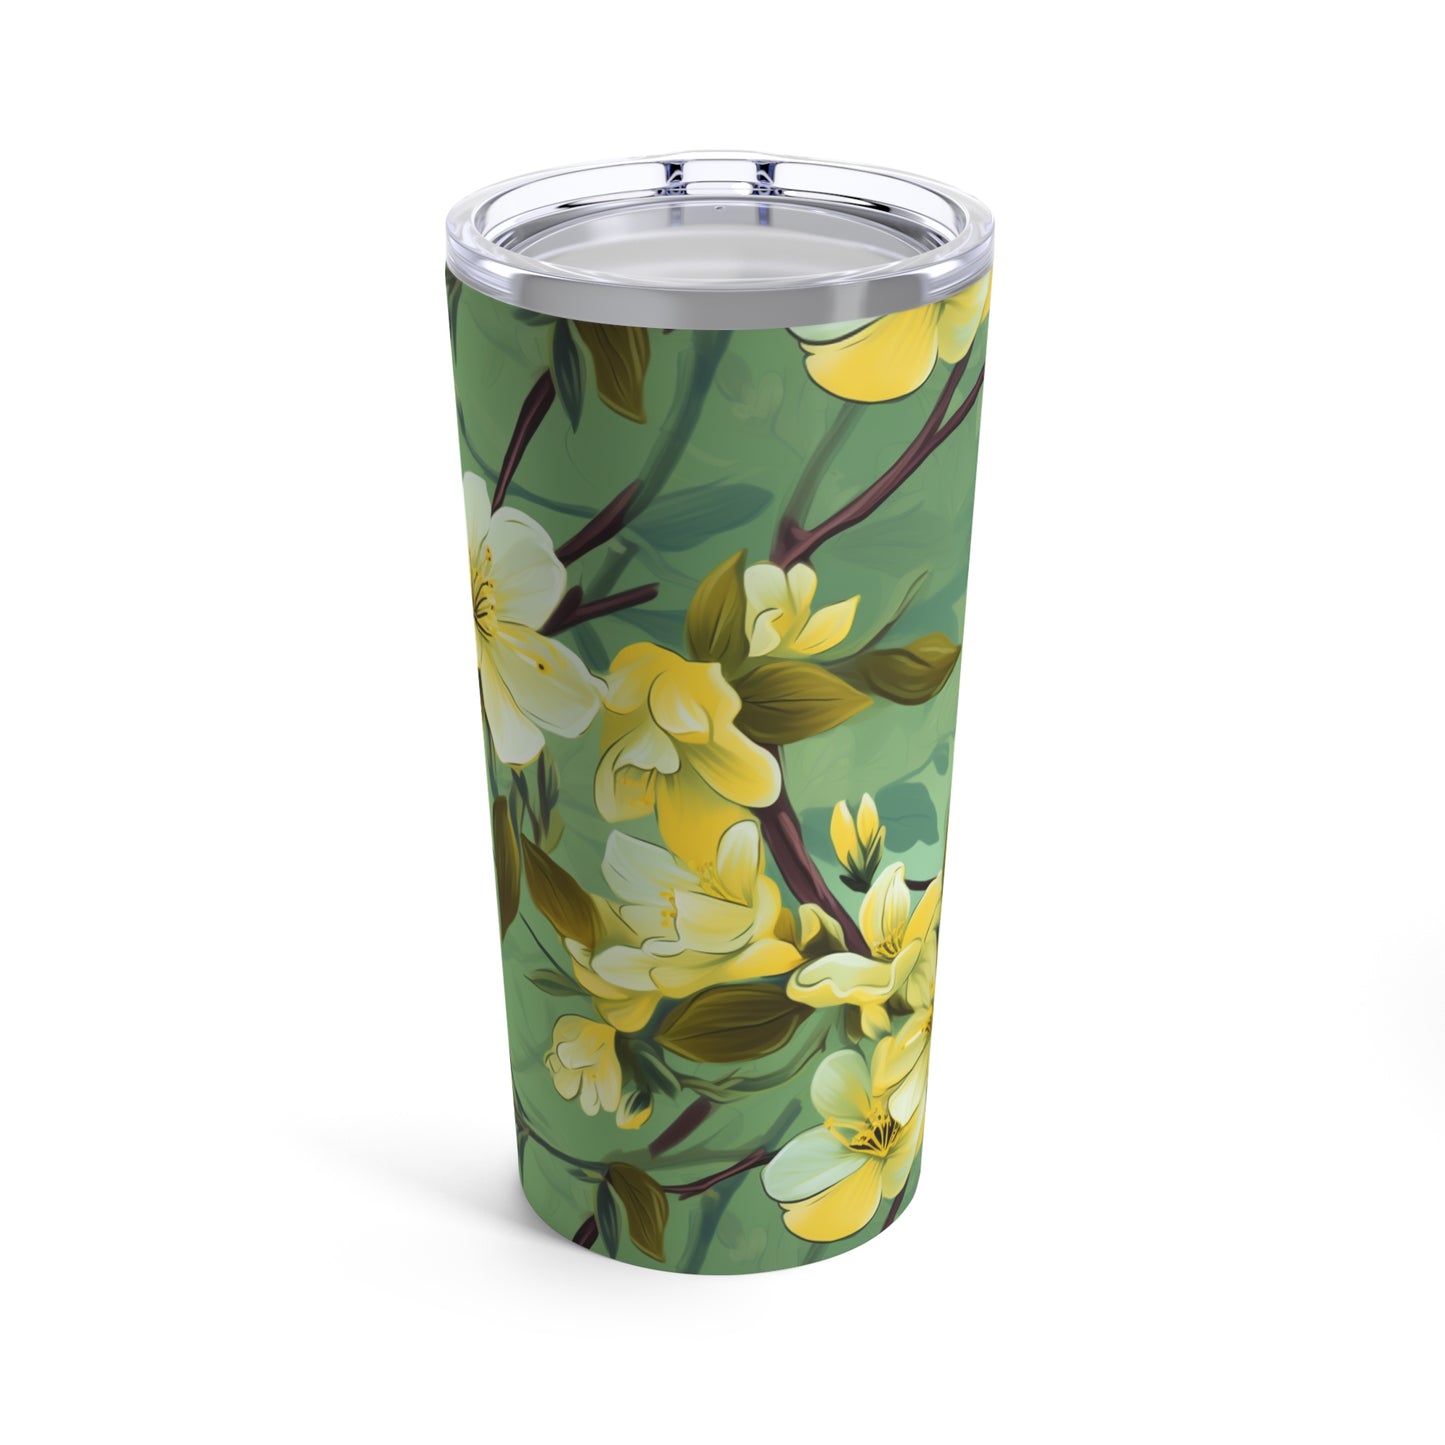 Bright Green Flowers On Branches Seamless Tumbler Wrap.